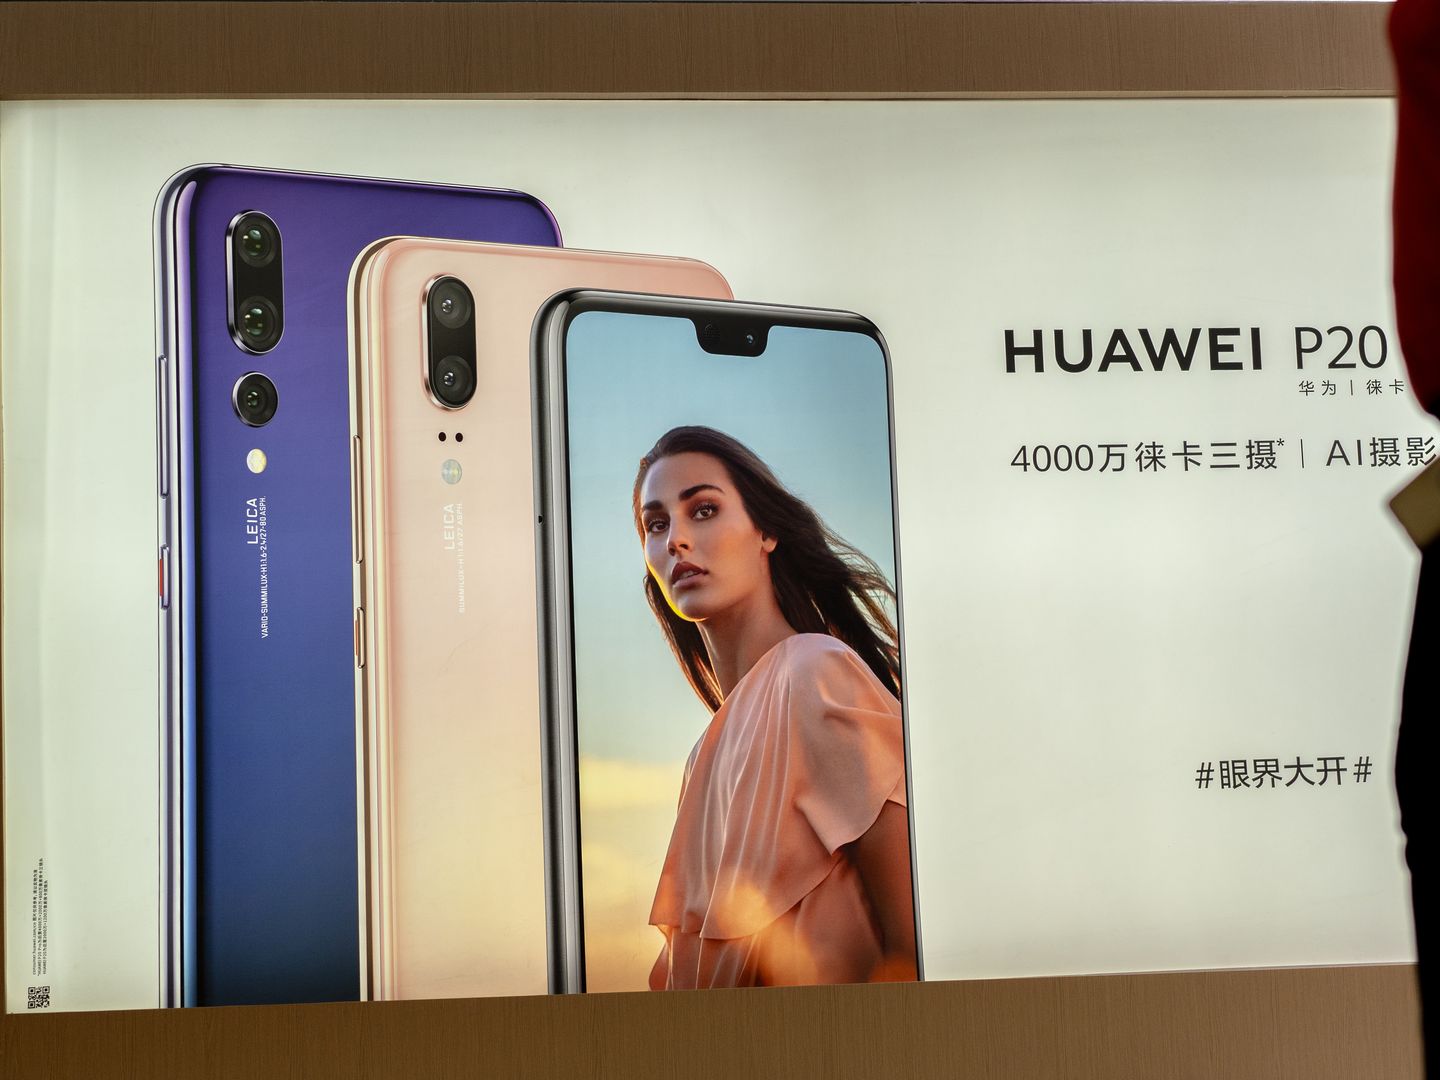 Huawei P20 Pro: The most exciting phone of 2018 is great for business too